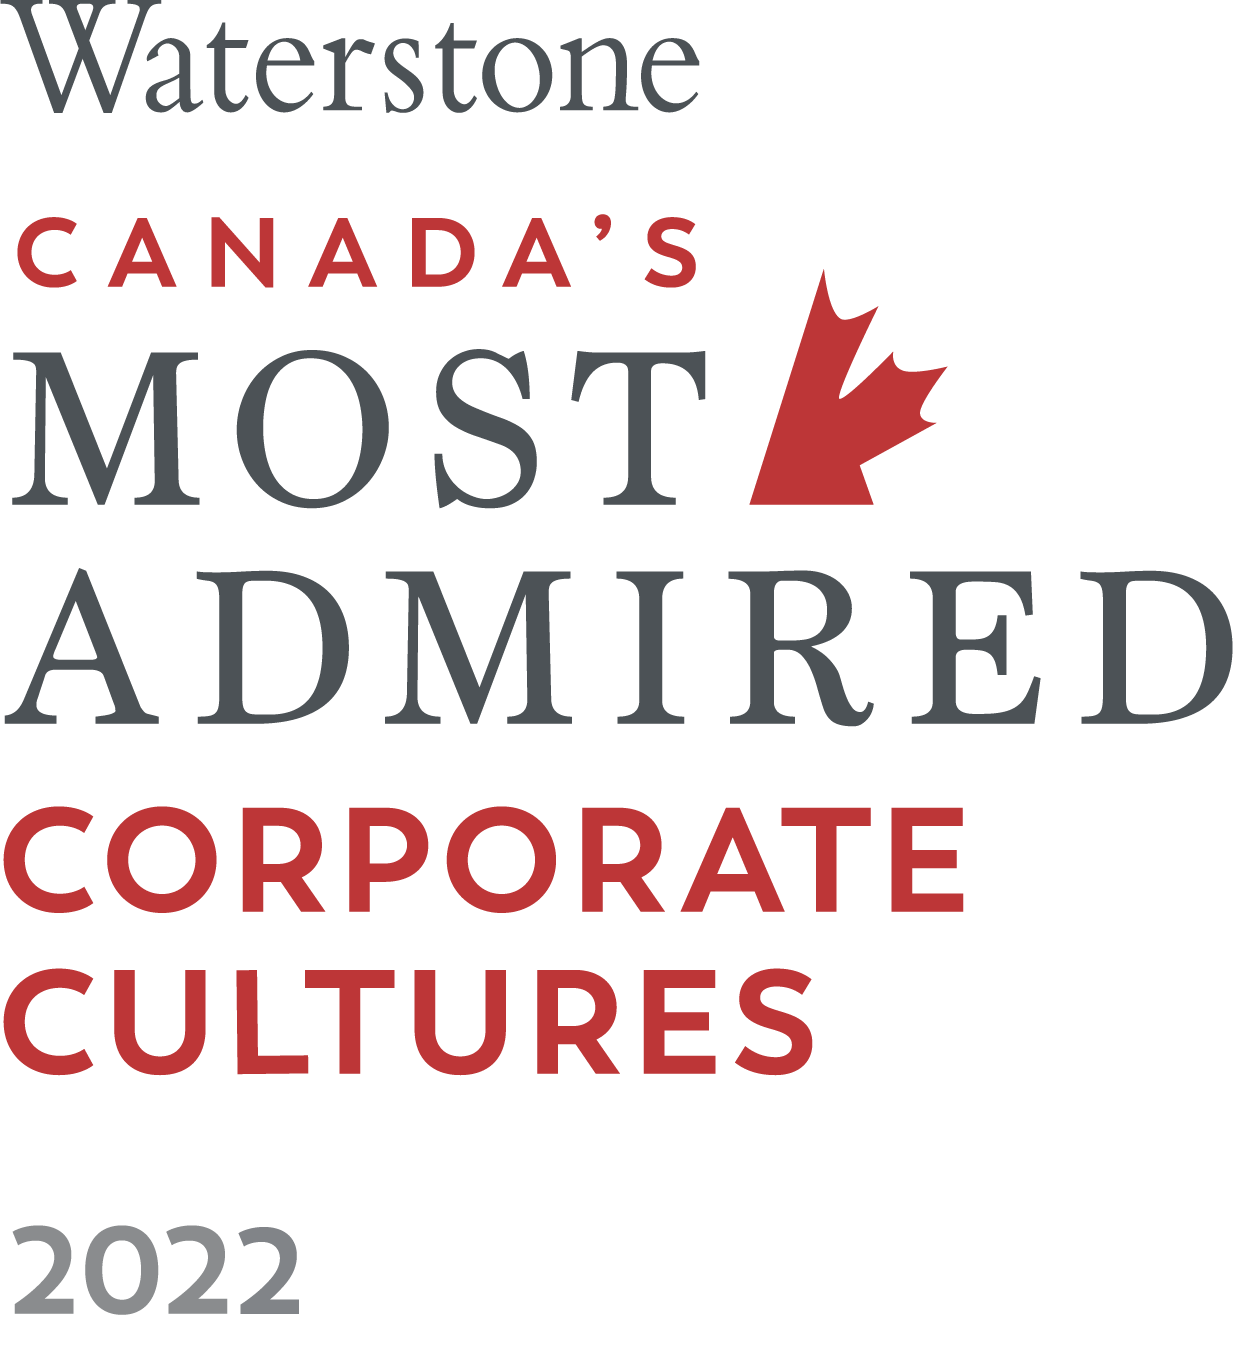 Waterstone Canada's Most Admired Corporate Cultures 2022 Logo